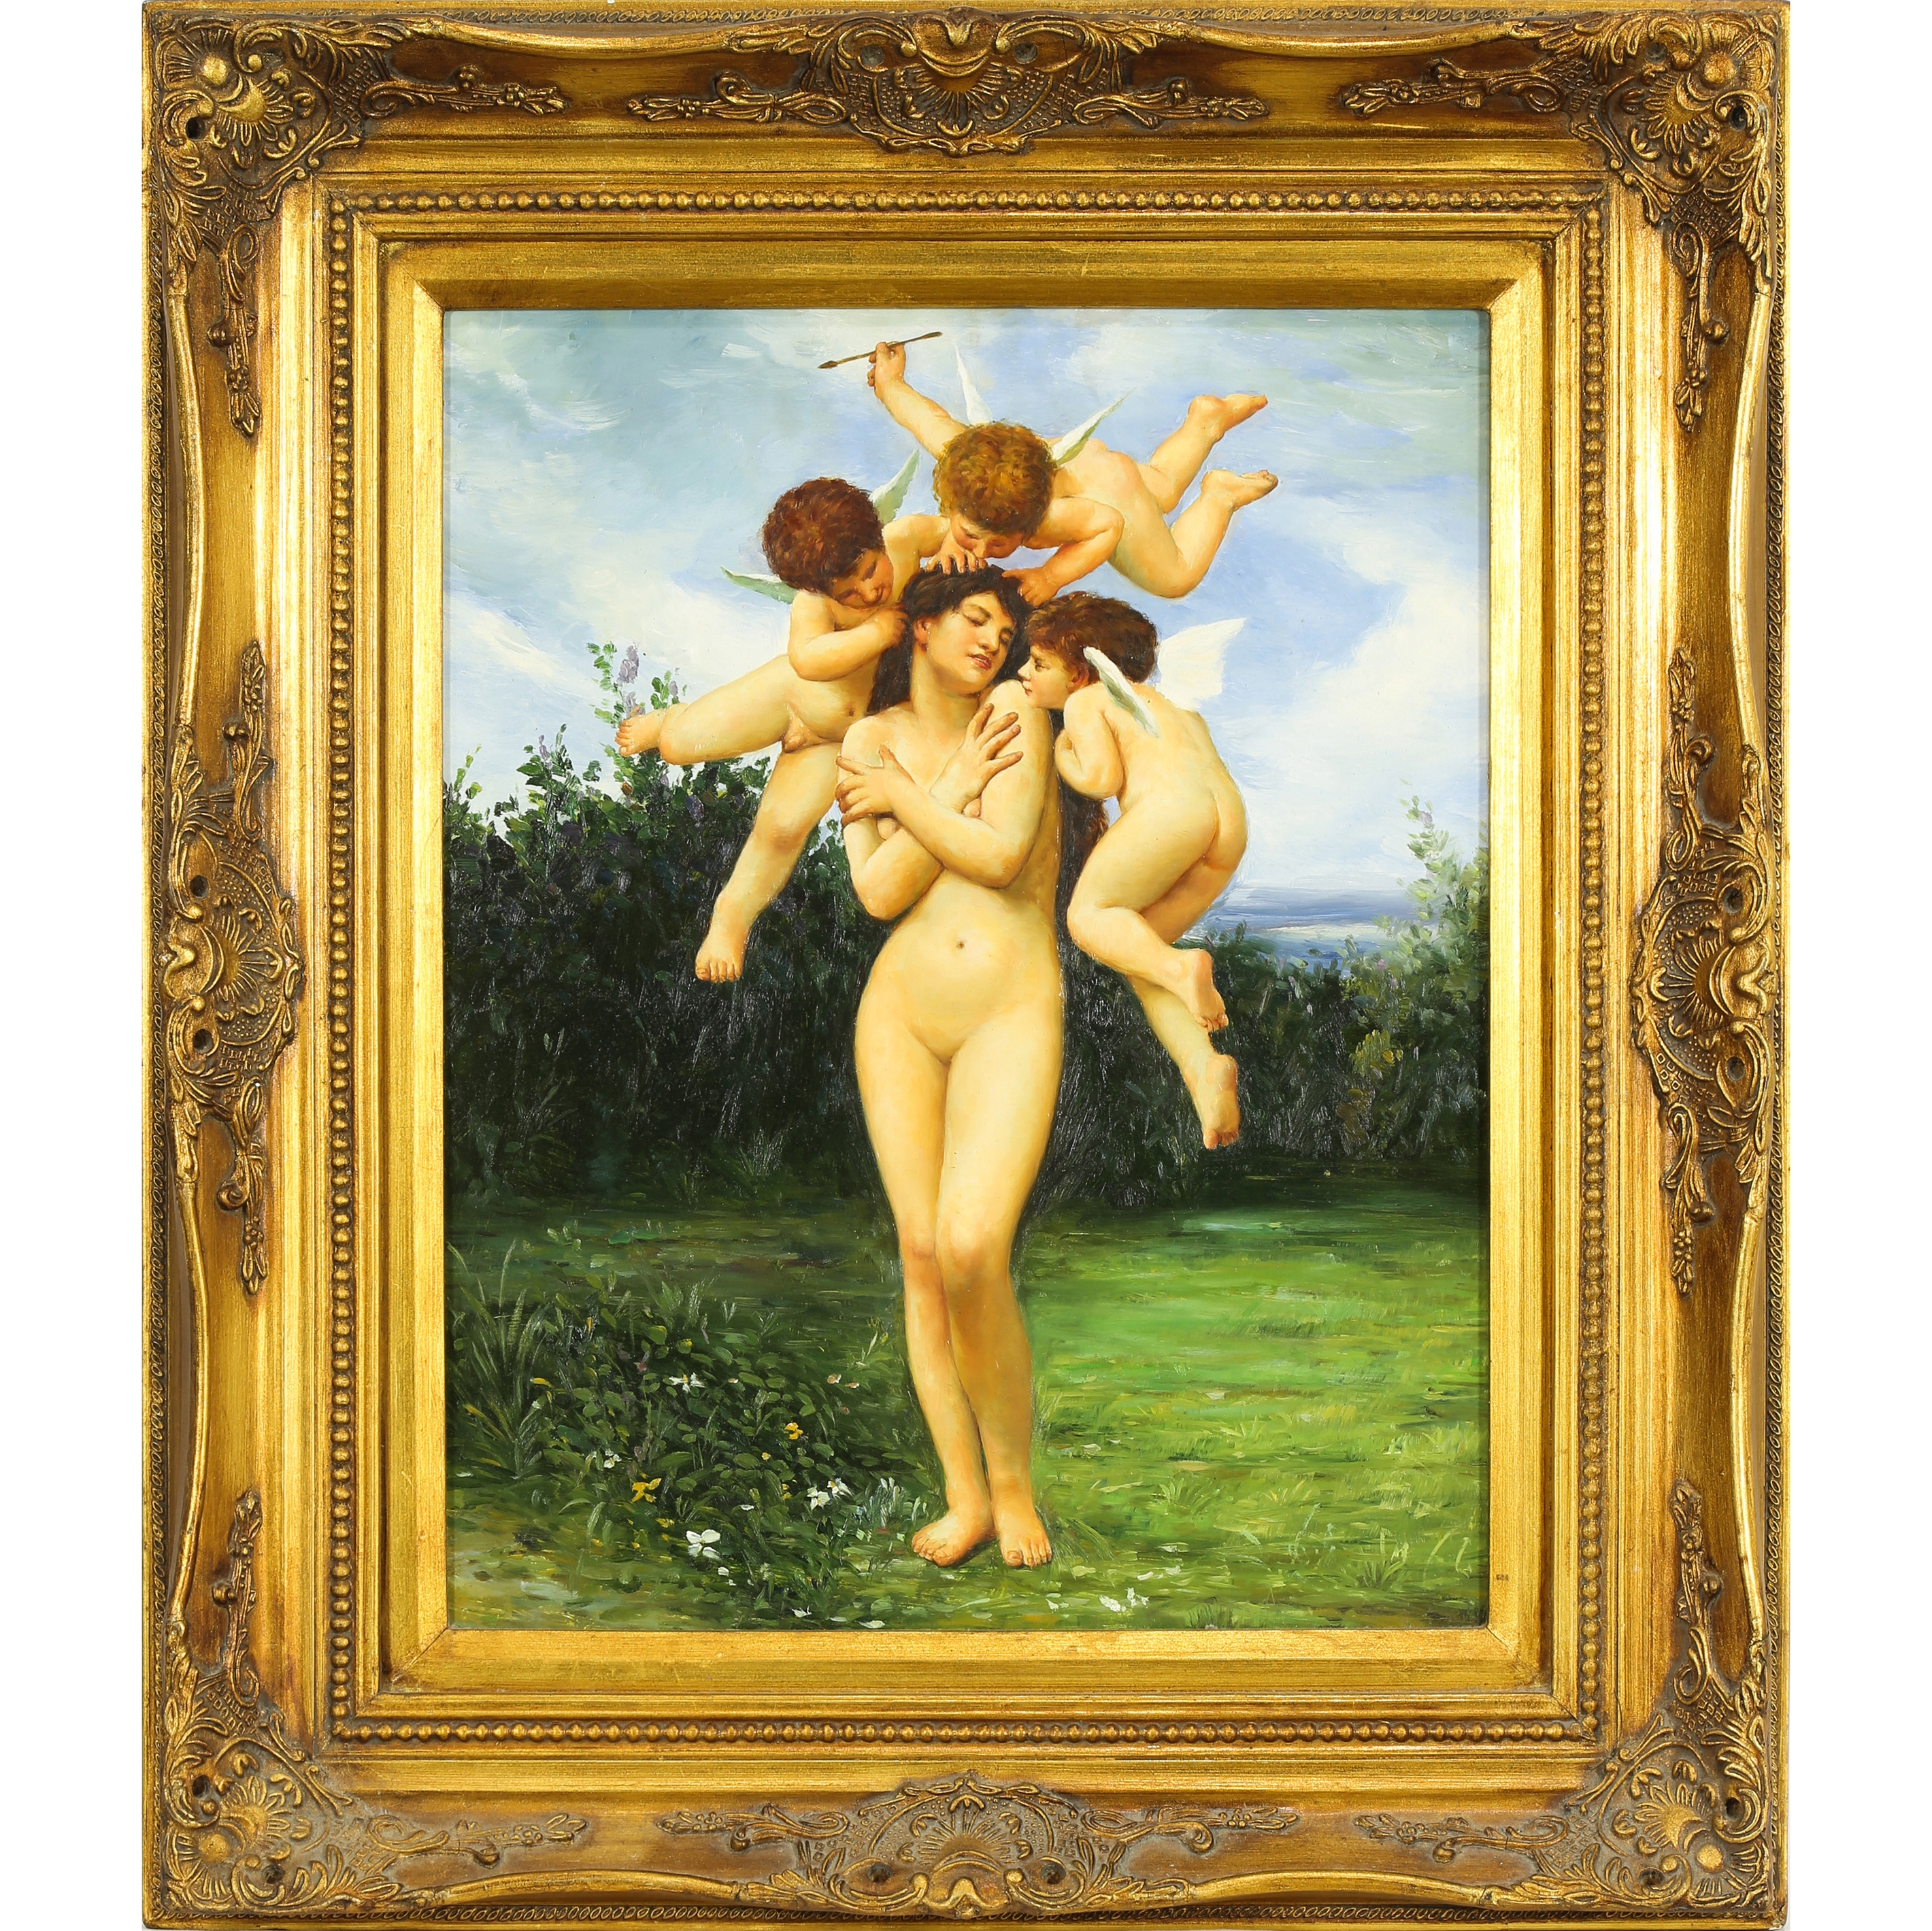 Venus Surrounded by Cupids by William Adolphe Bouguereau, 20th century